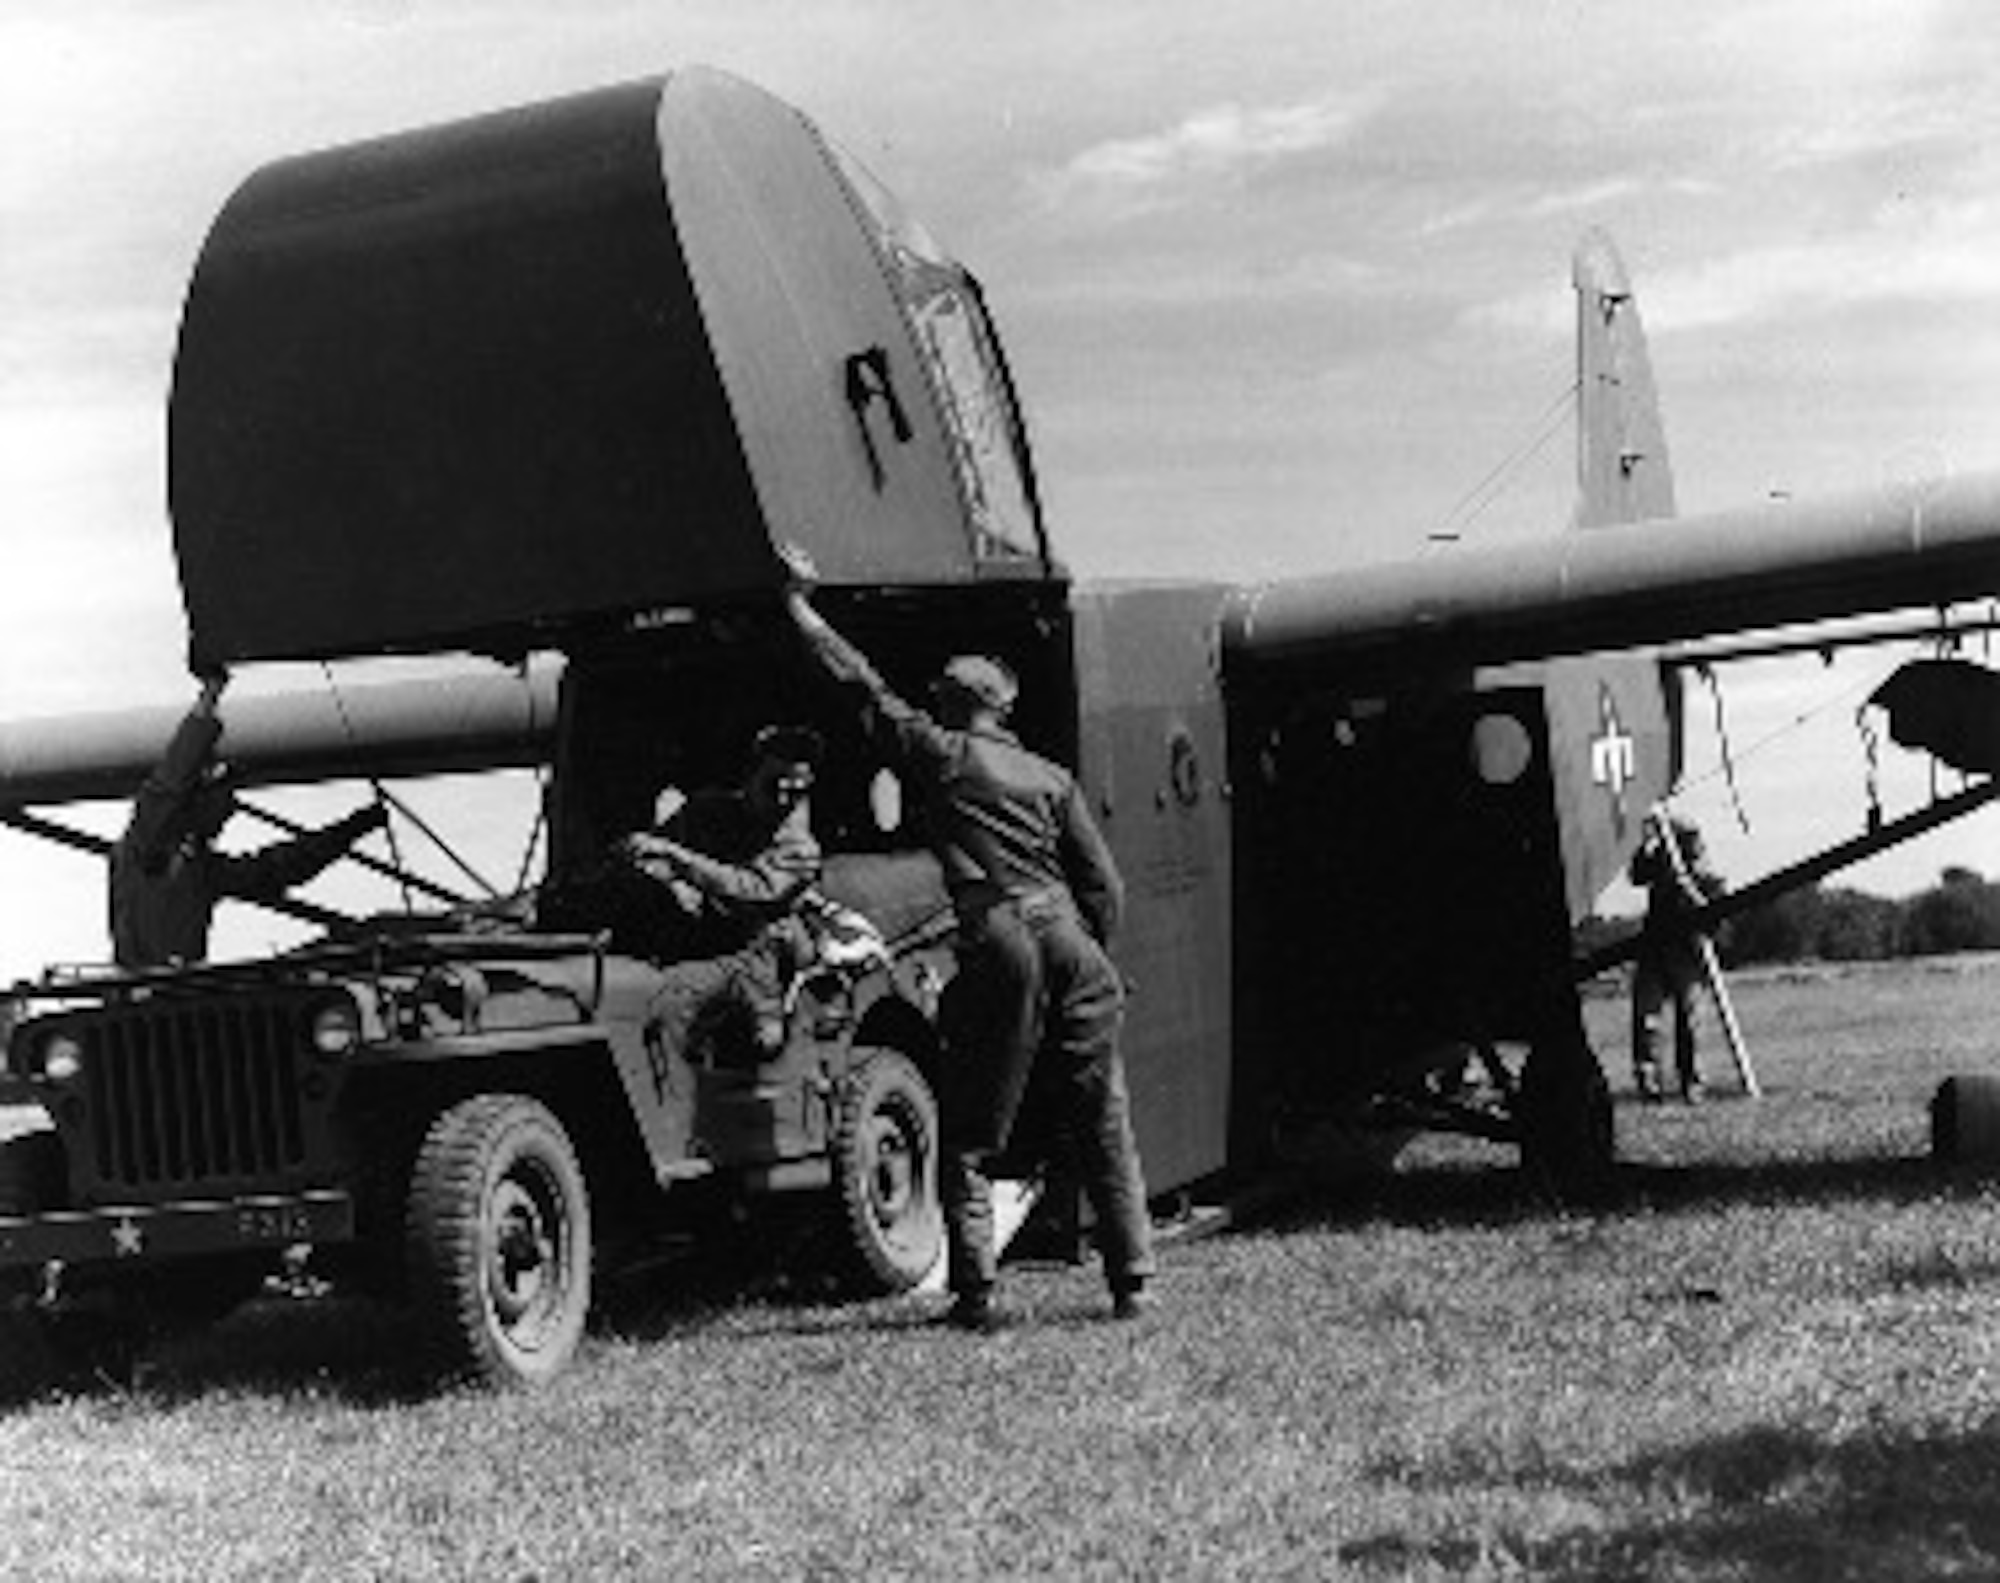 Glider operations were critical to the 1 ACG in the Burma campaign. Once released from the C-47 tow aircraft, they silently soared into a landing zone with critical cargo like troops and jeeps.